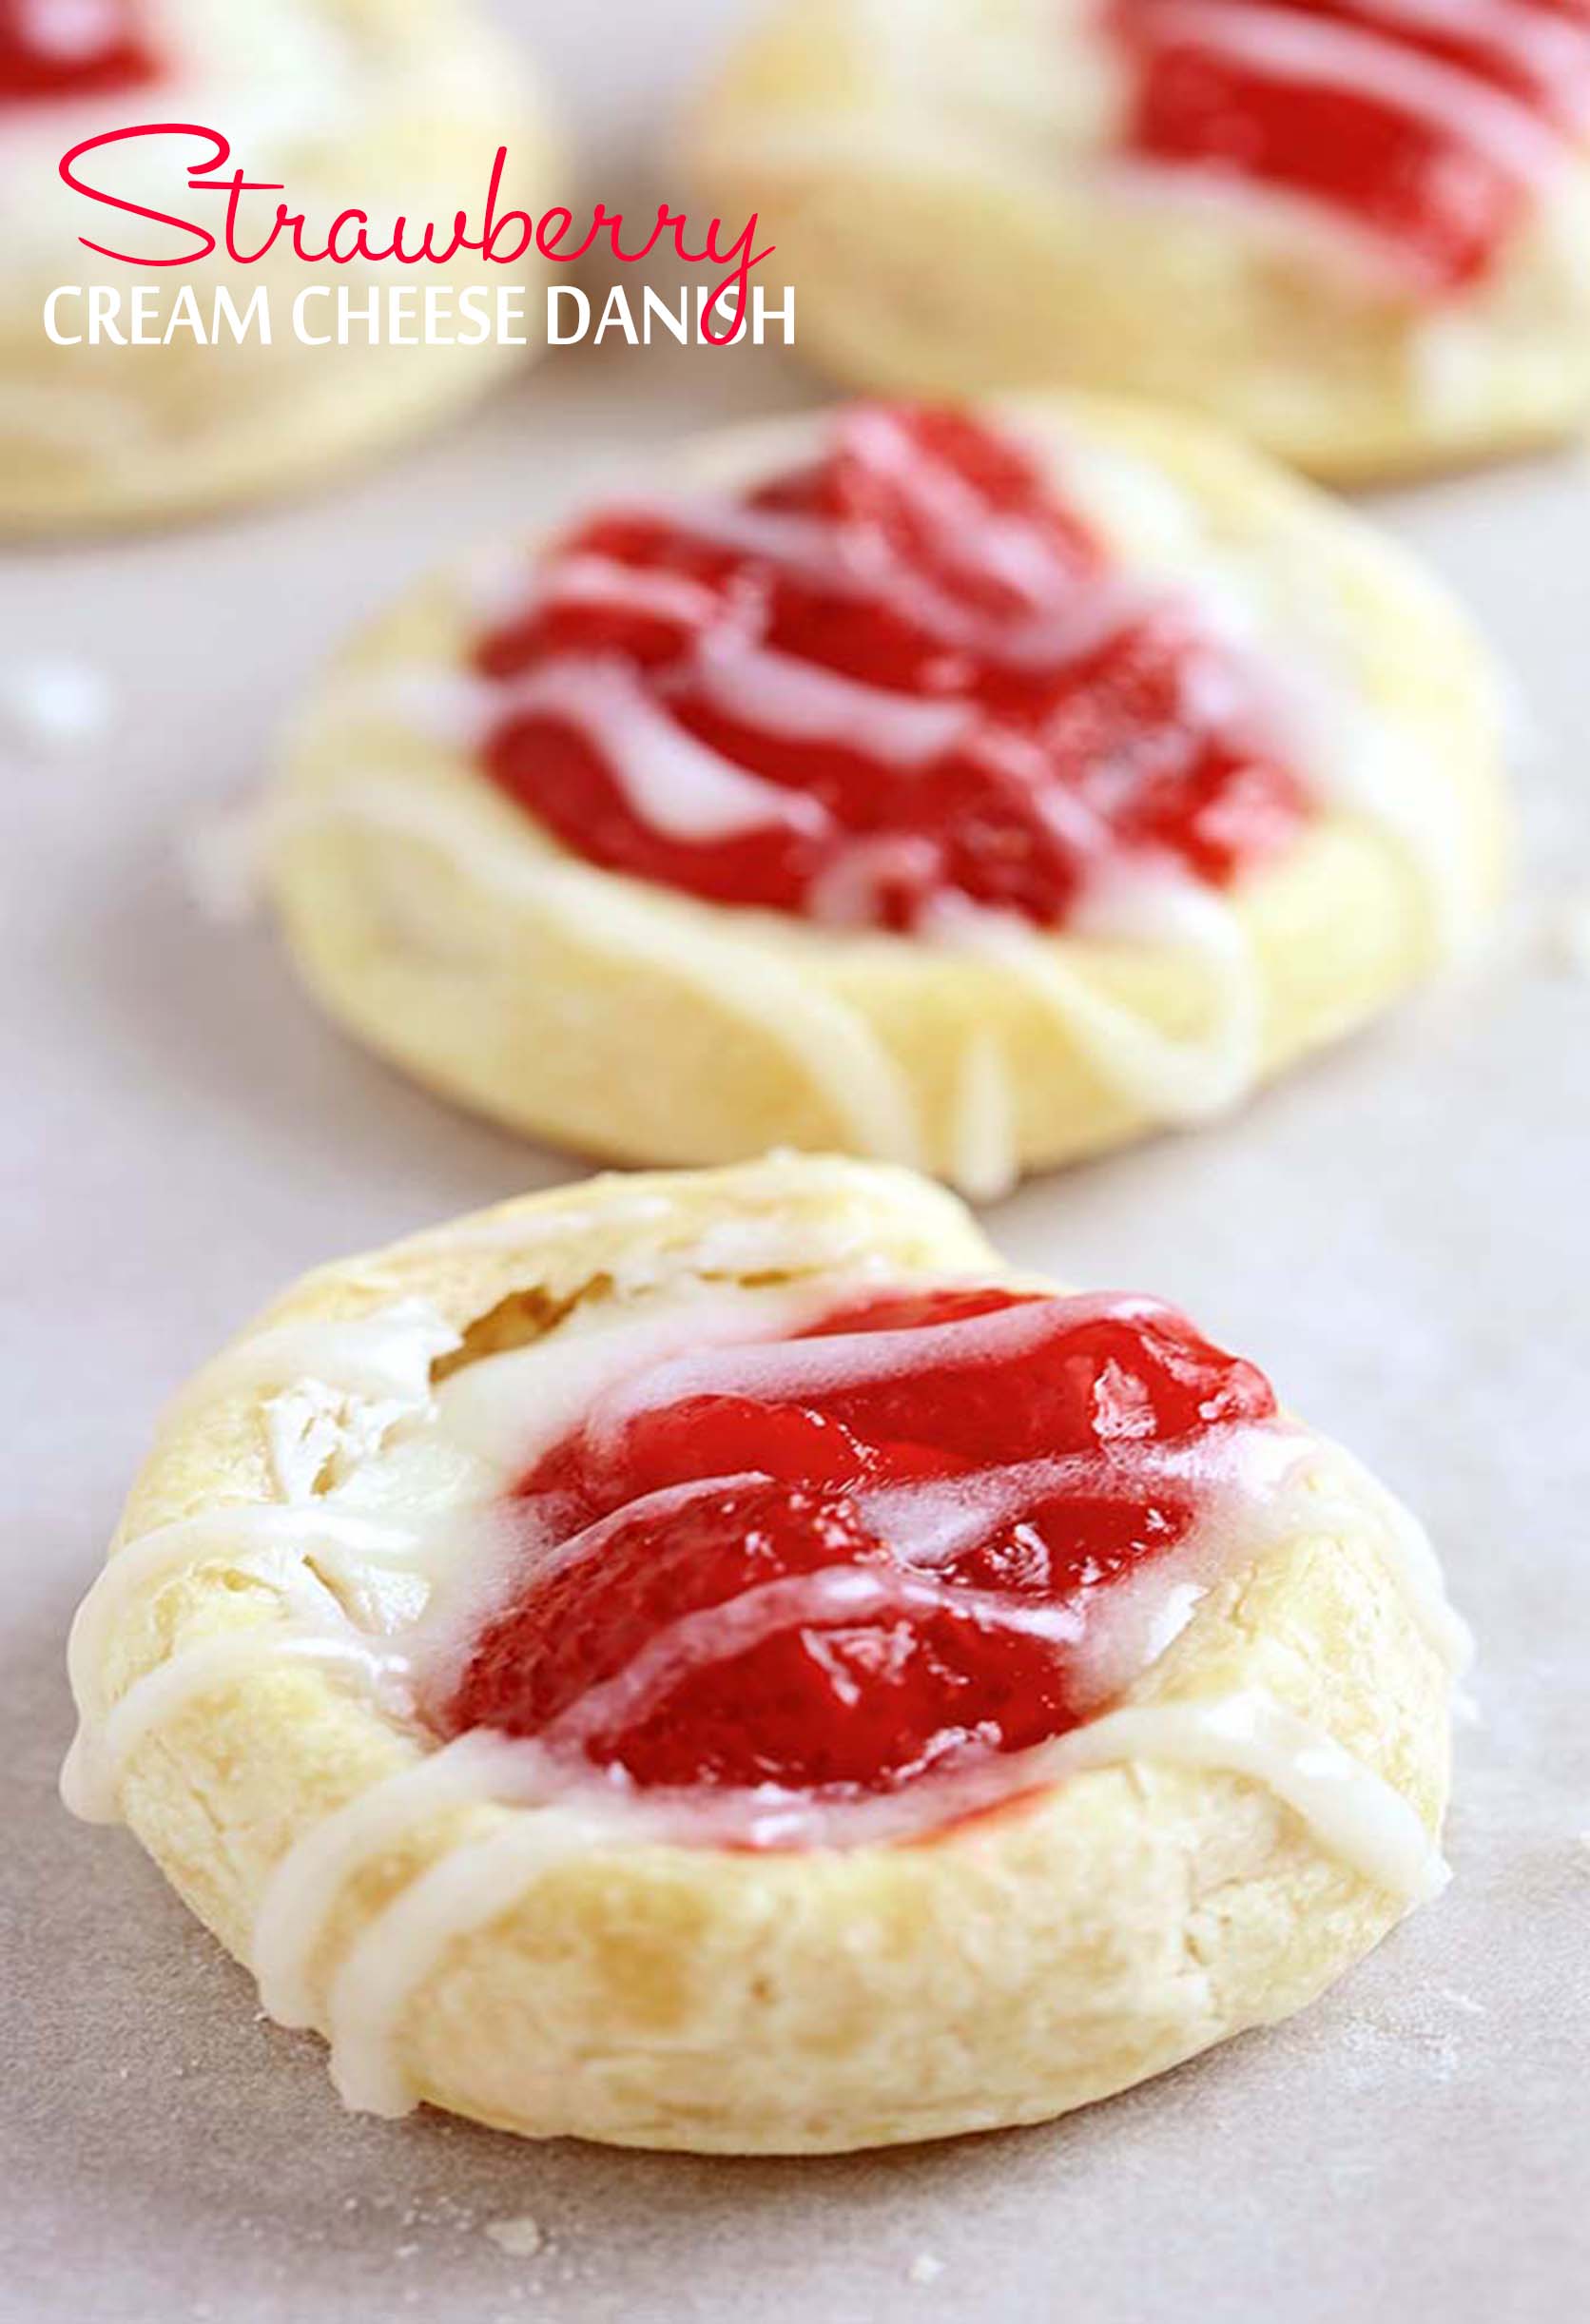 Who can resist flaky crescent rolls combined with a sweet cream cheese and strawberry filling? These strawberry cream cheese danish are so addictive!